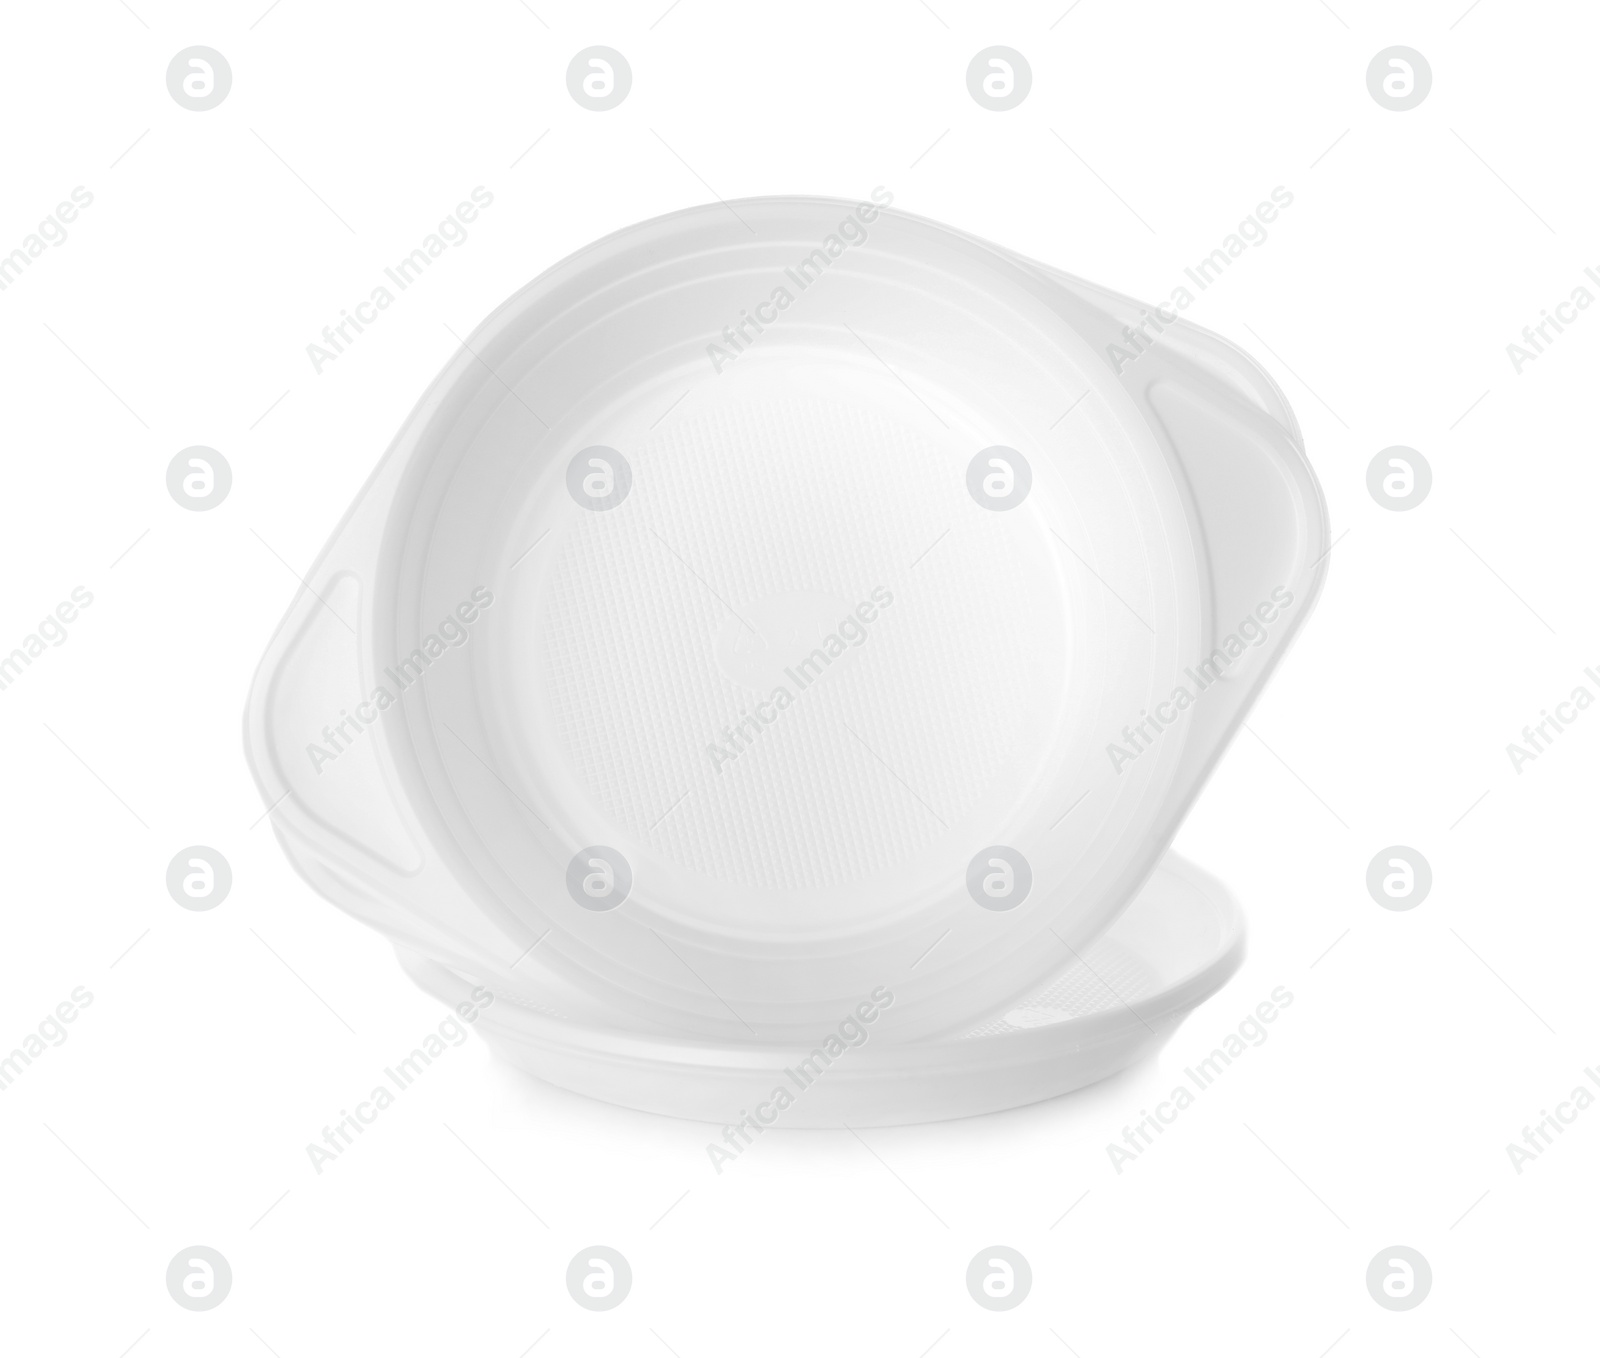 Photo of Set of disposable plastic dishware isolated on white